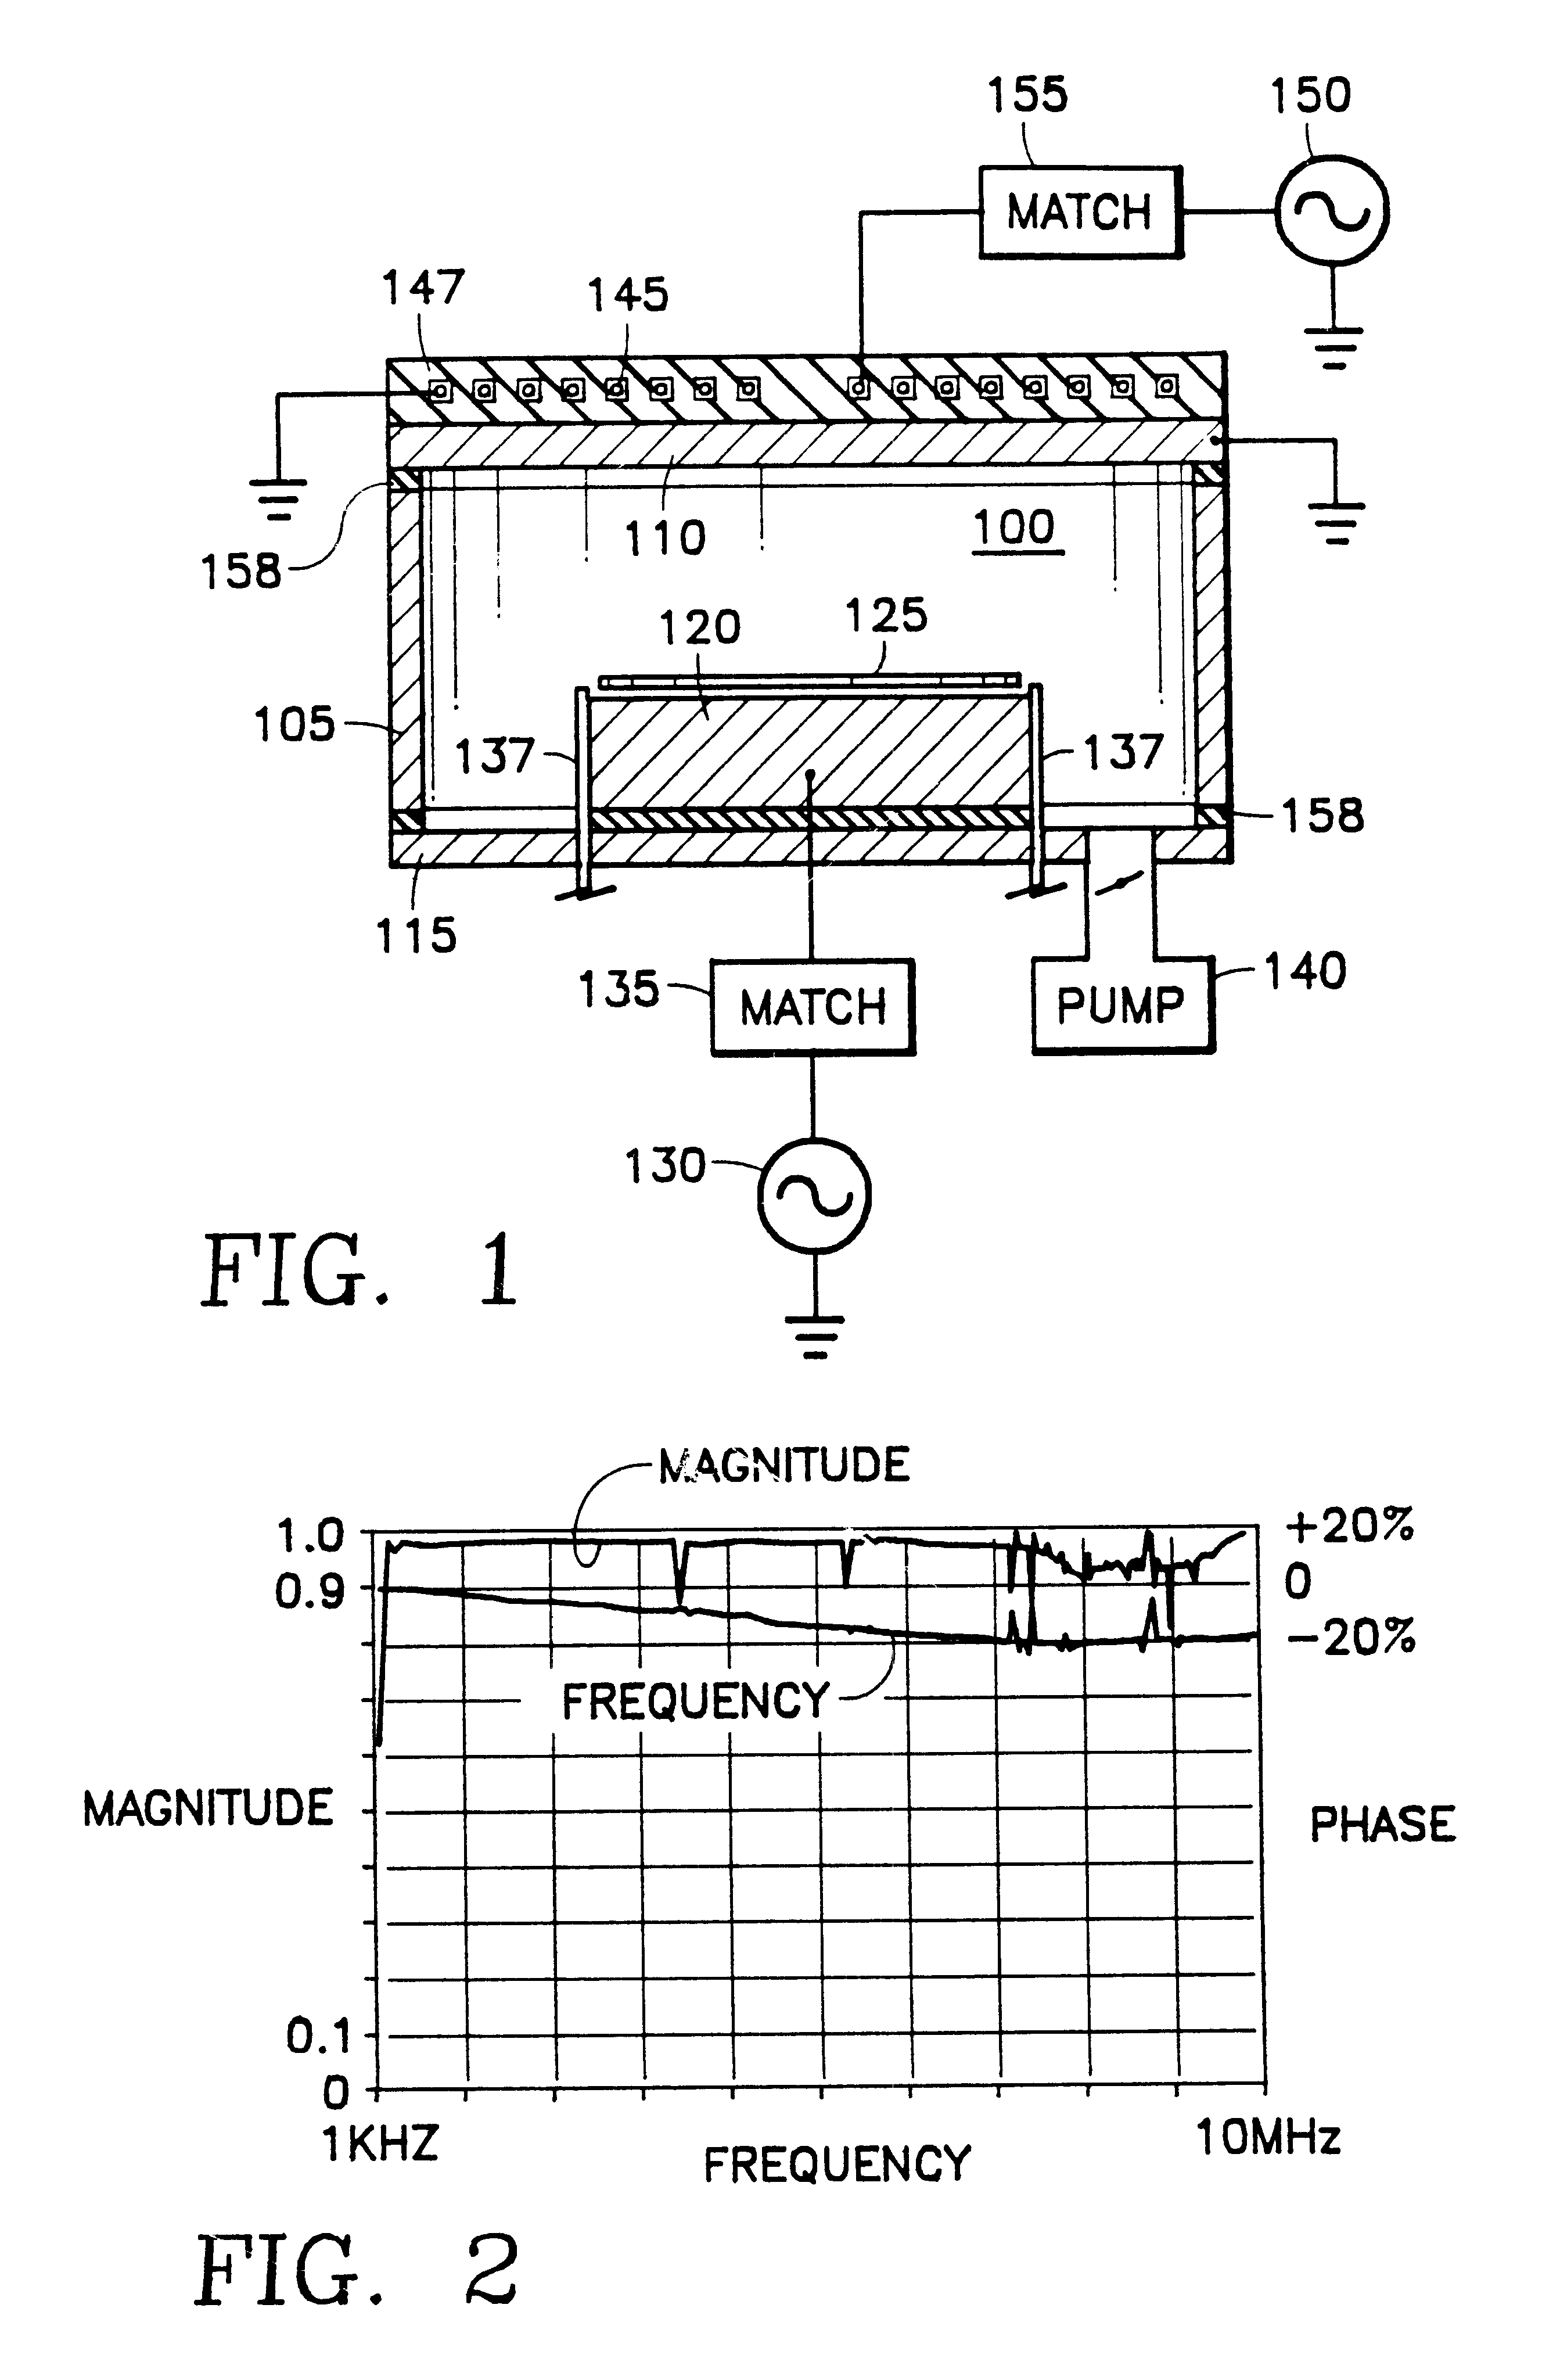 Parallel-plate electrode plasma reactor having an inductive antenna and adjustable radial distribution of plasma ion density